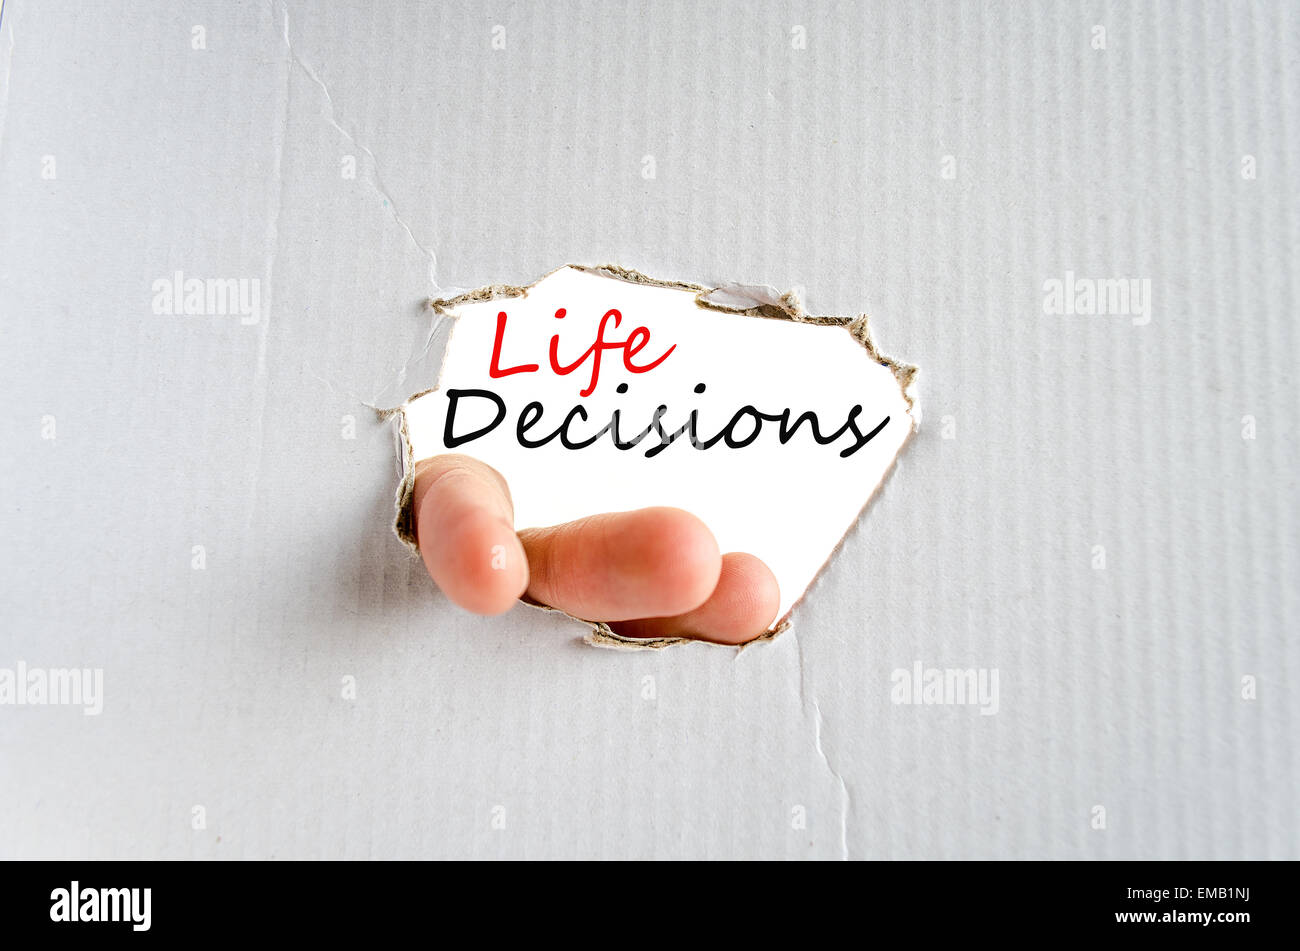 Life Decisions Concept Isolated Over White Background Stock Photo